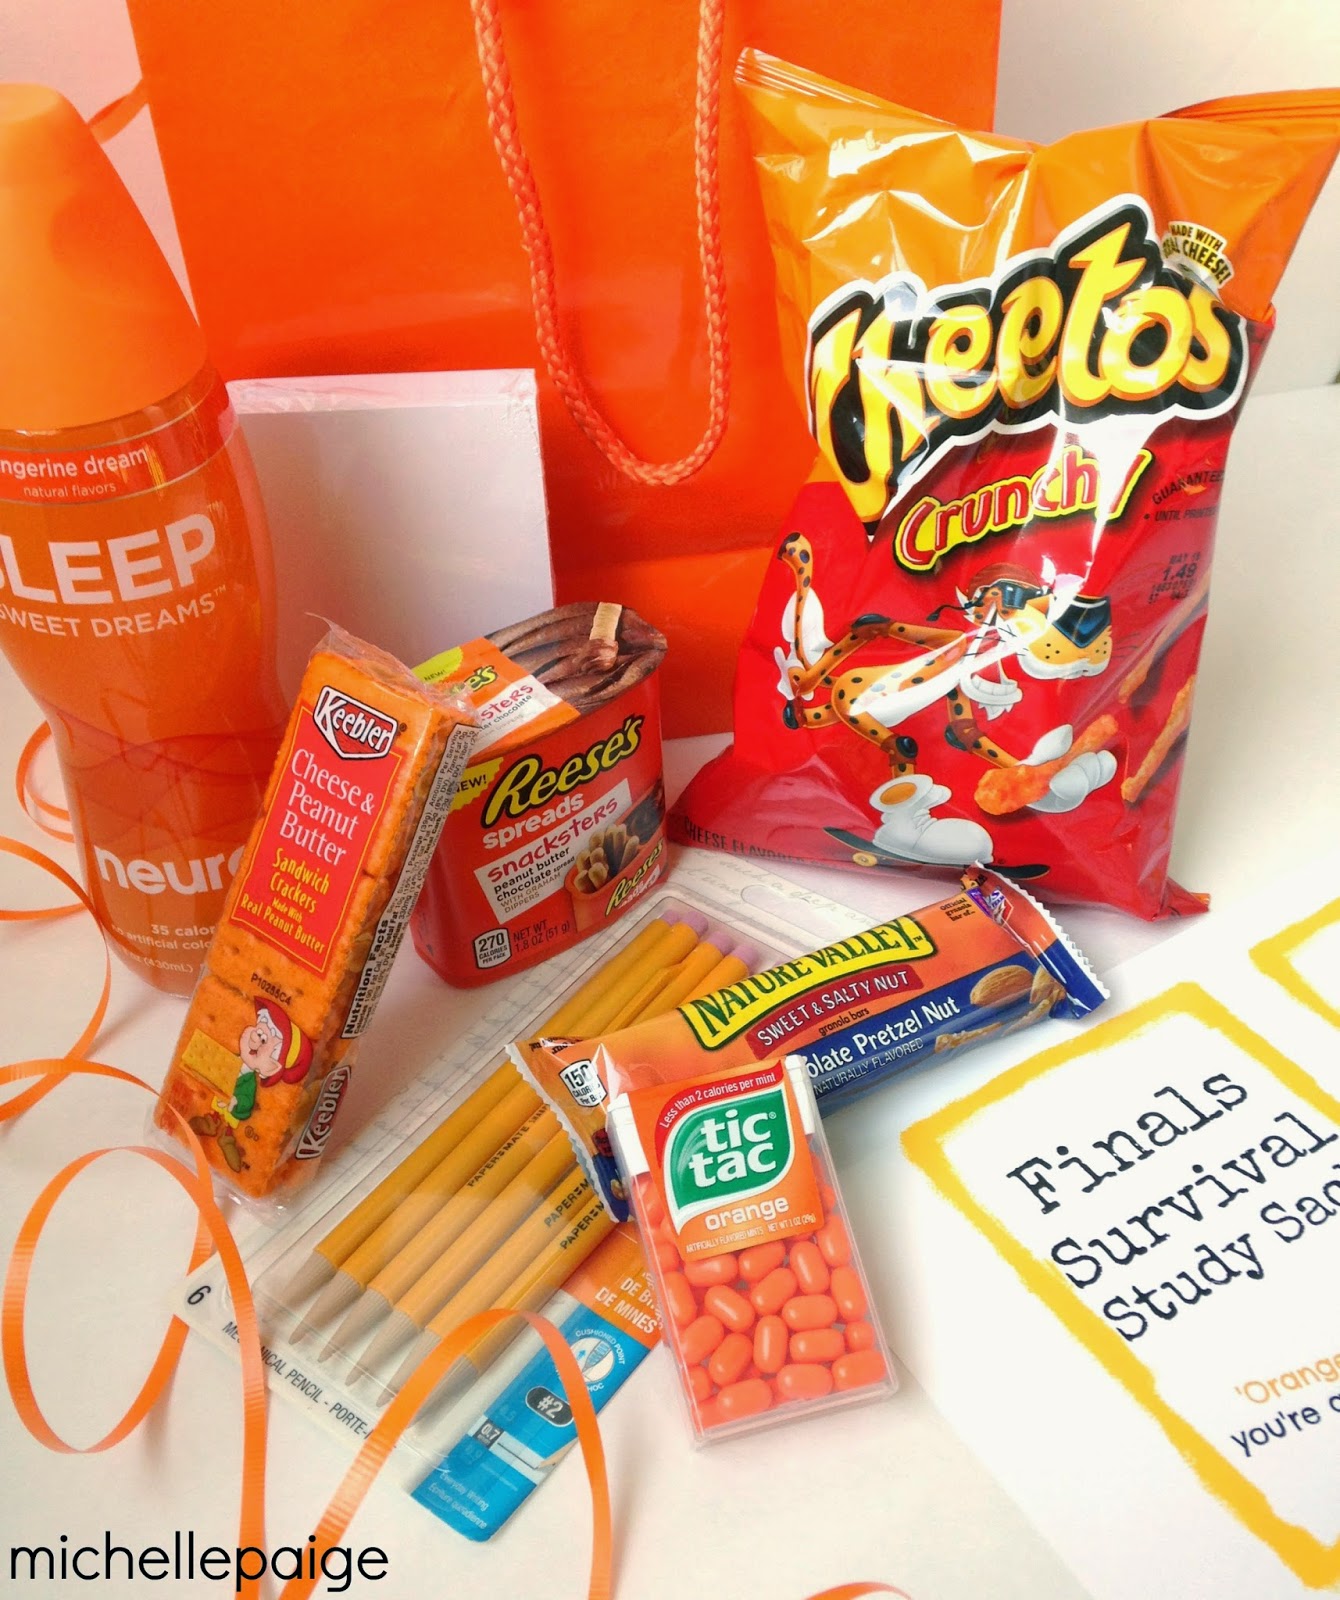 Orange foods and treats for gift package.